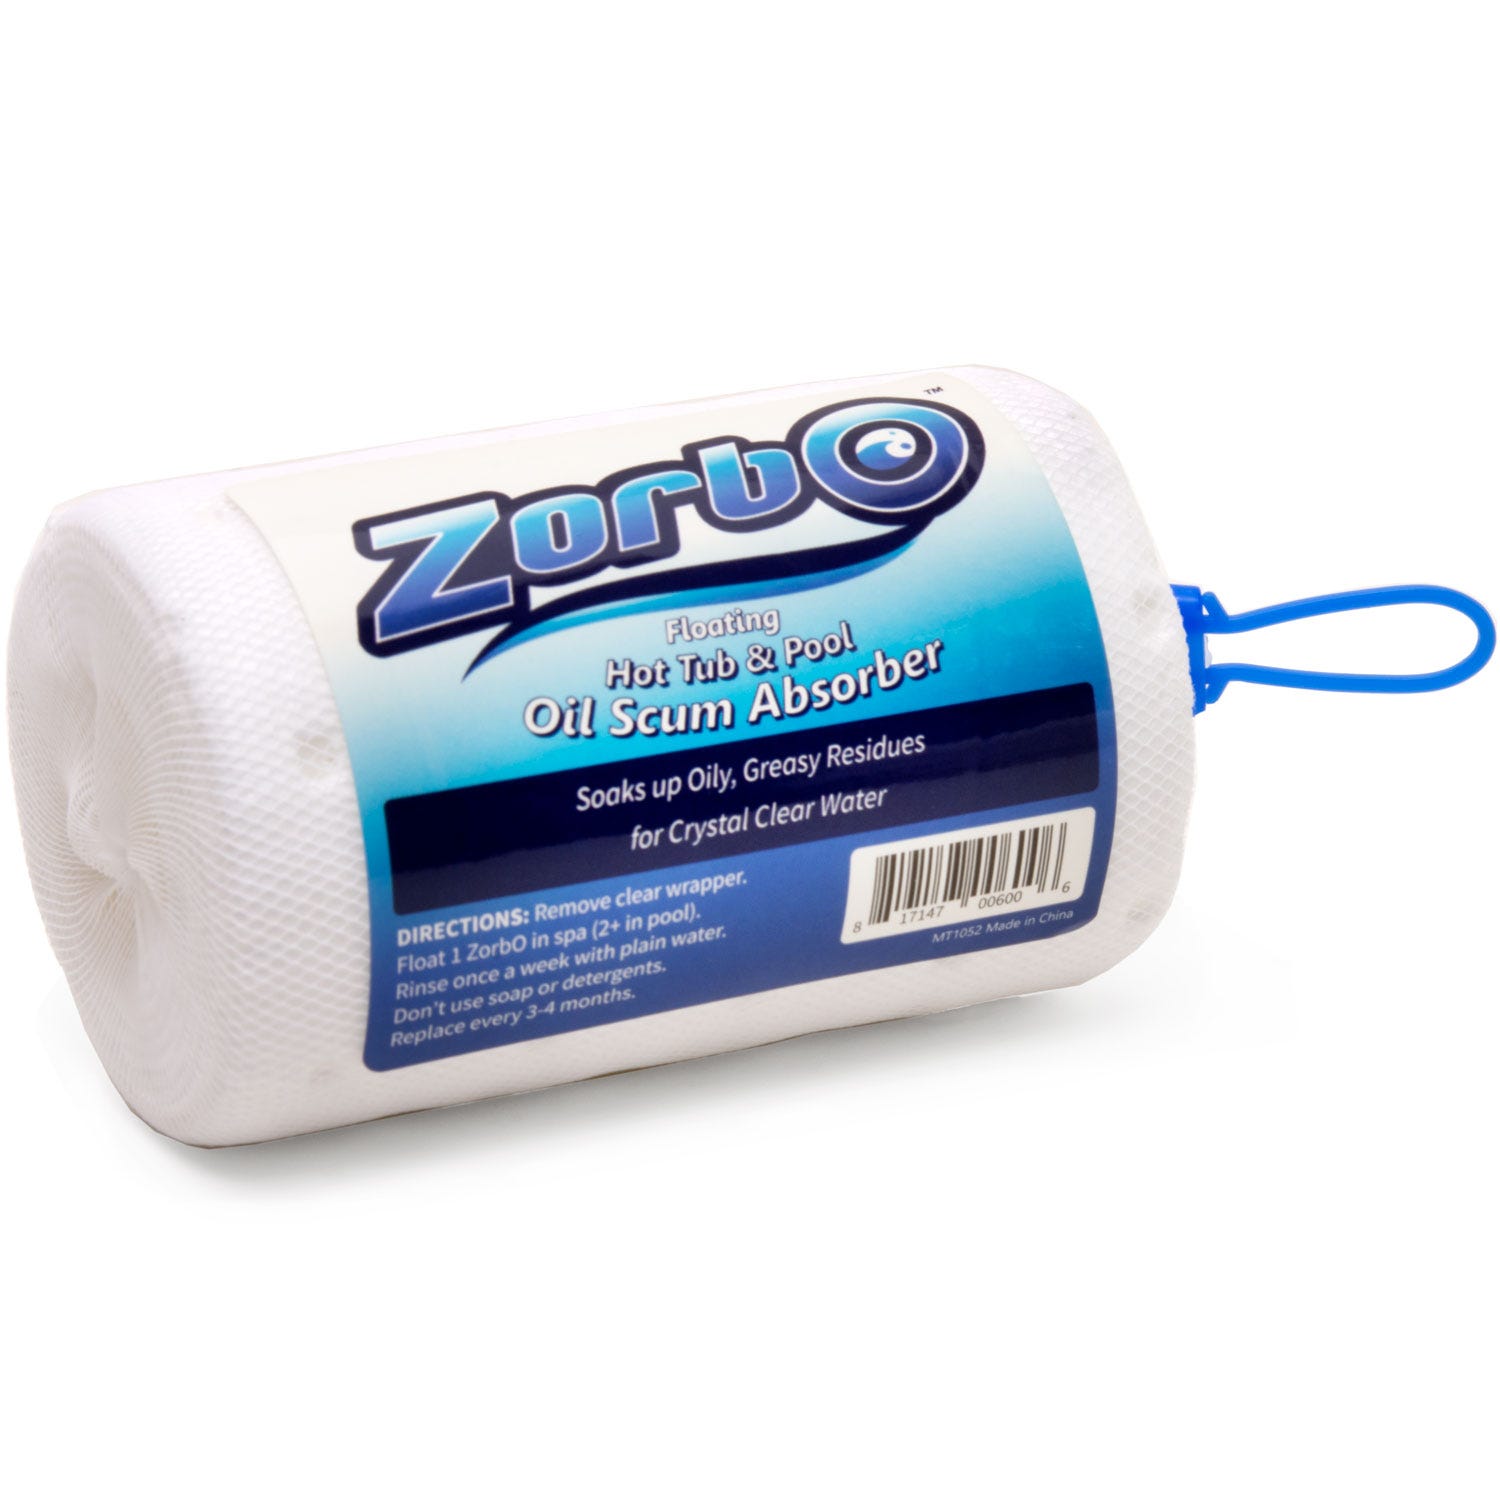 Zorbo Scum Brick Floating Oil Absorbent Material